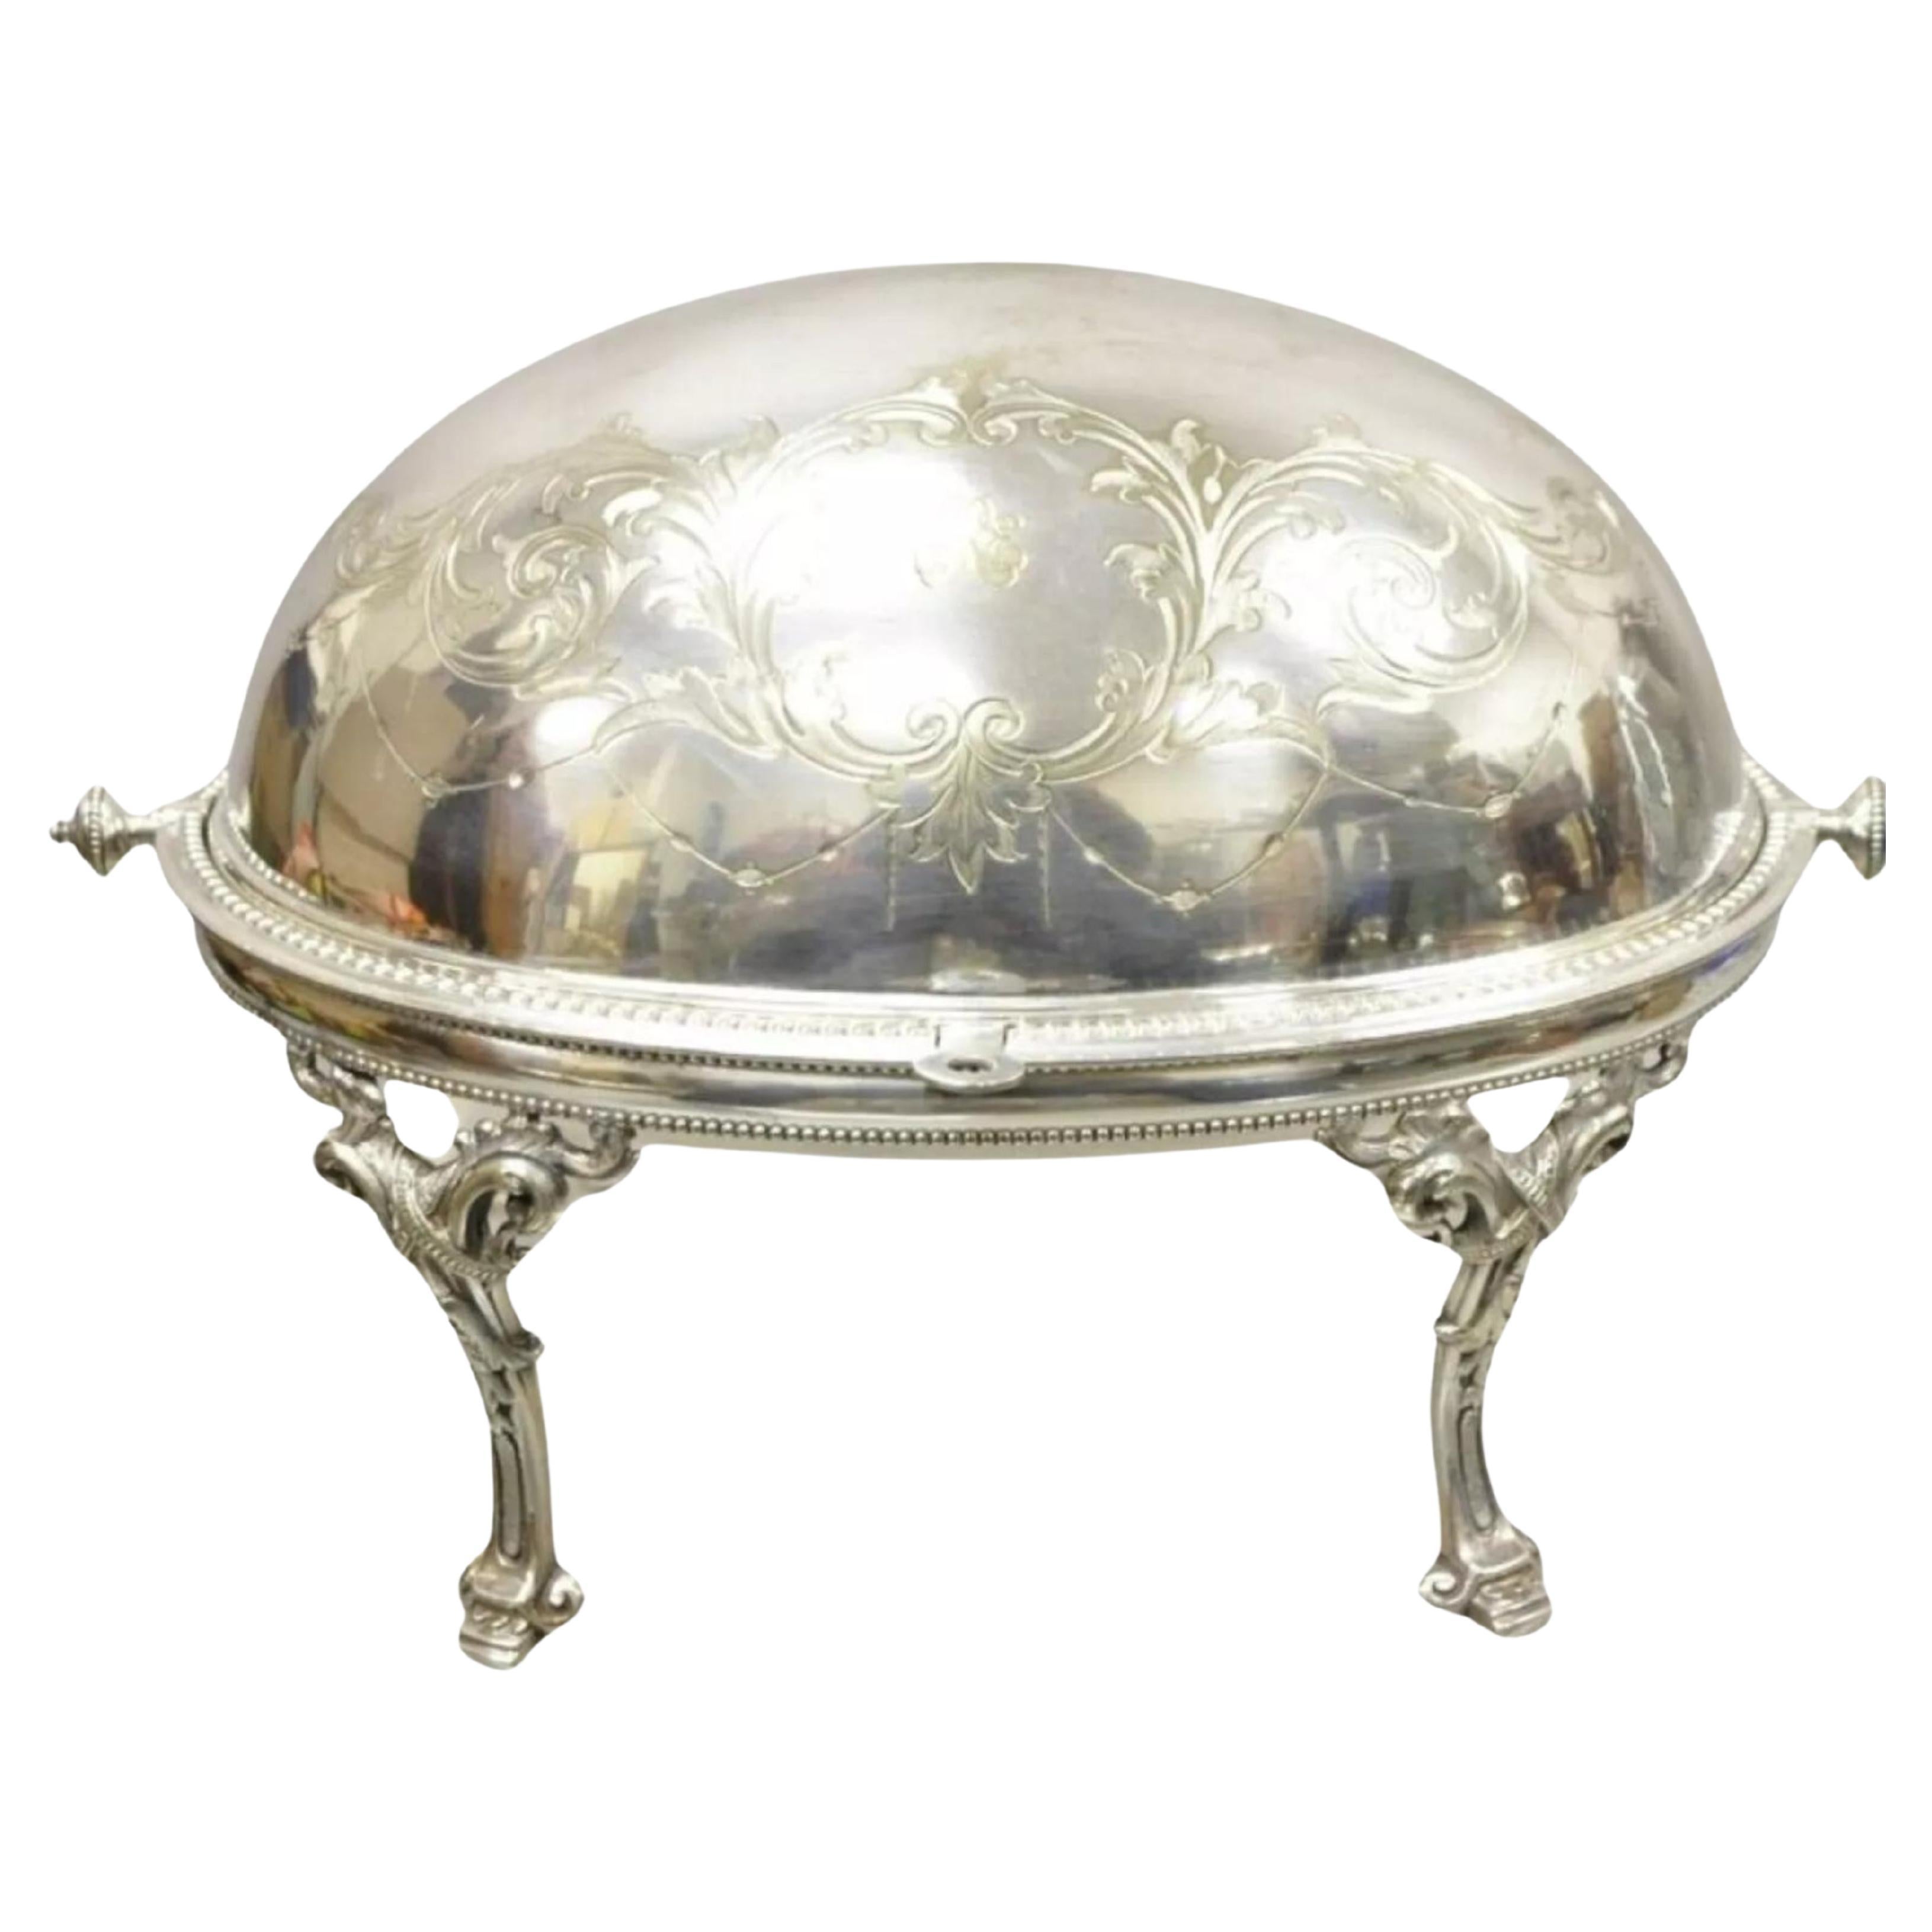 Antique Edwardian Silver Plated Revolving Dome Oval Chafing Dish Food Warmer For Sale